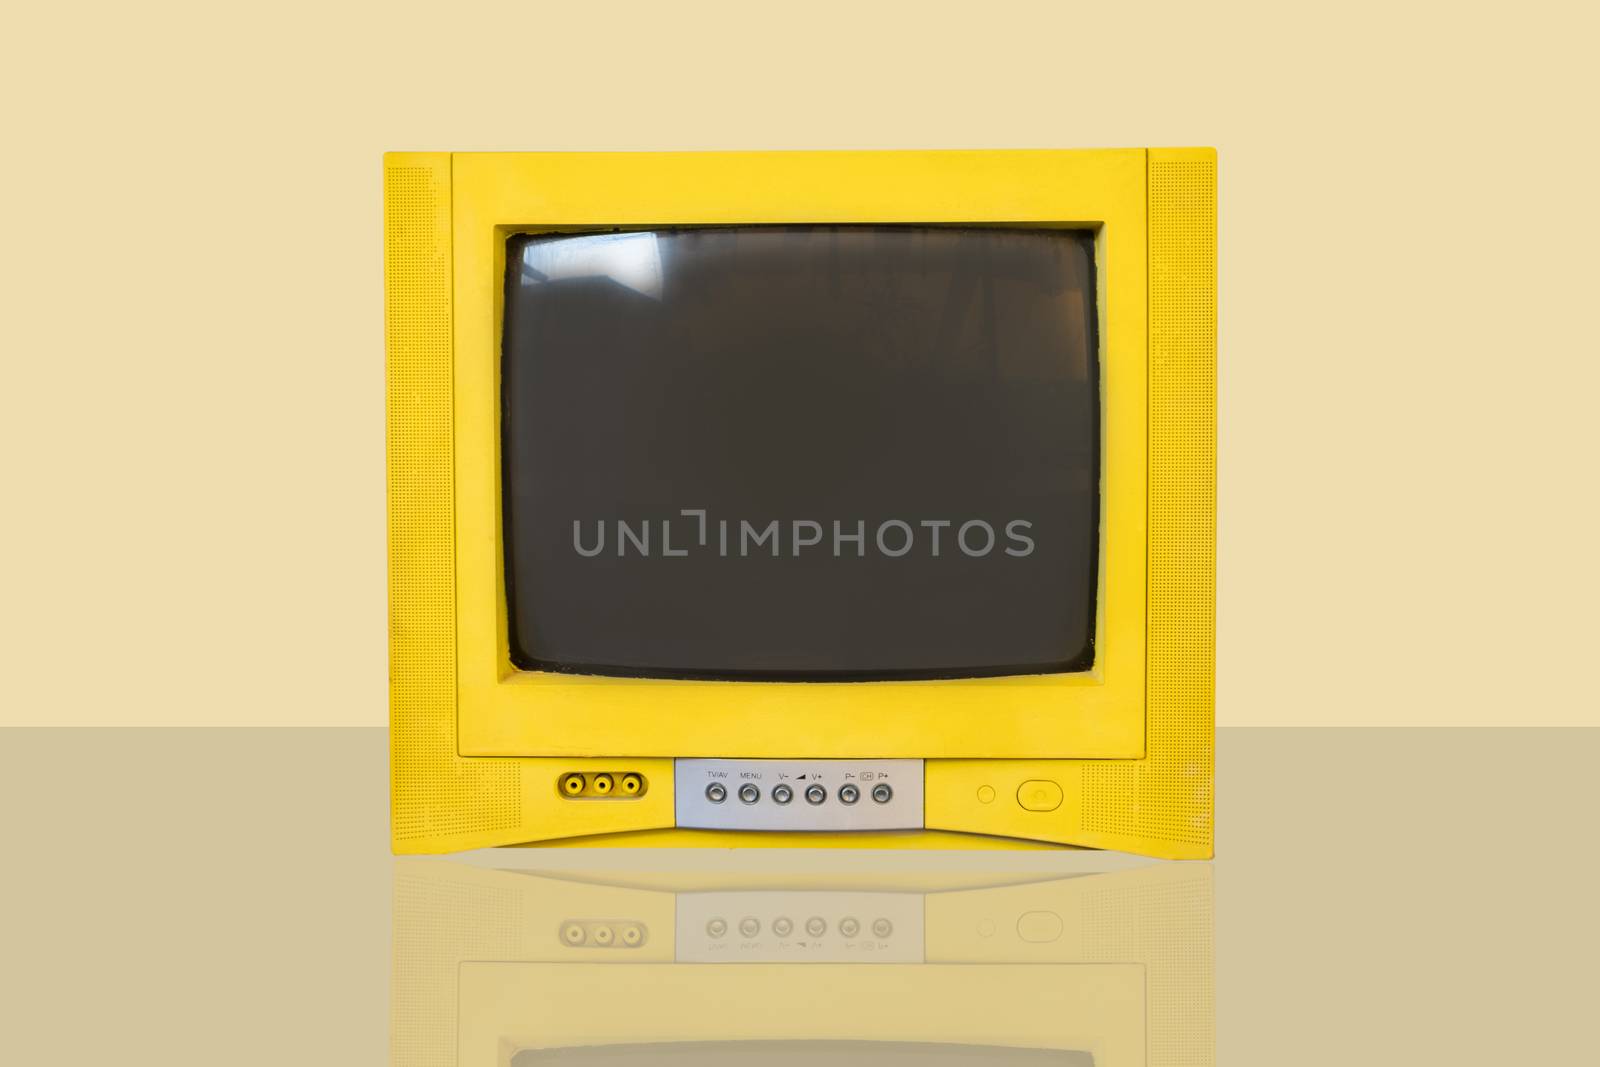 Retro old television from 80s on yellow background with shadow.